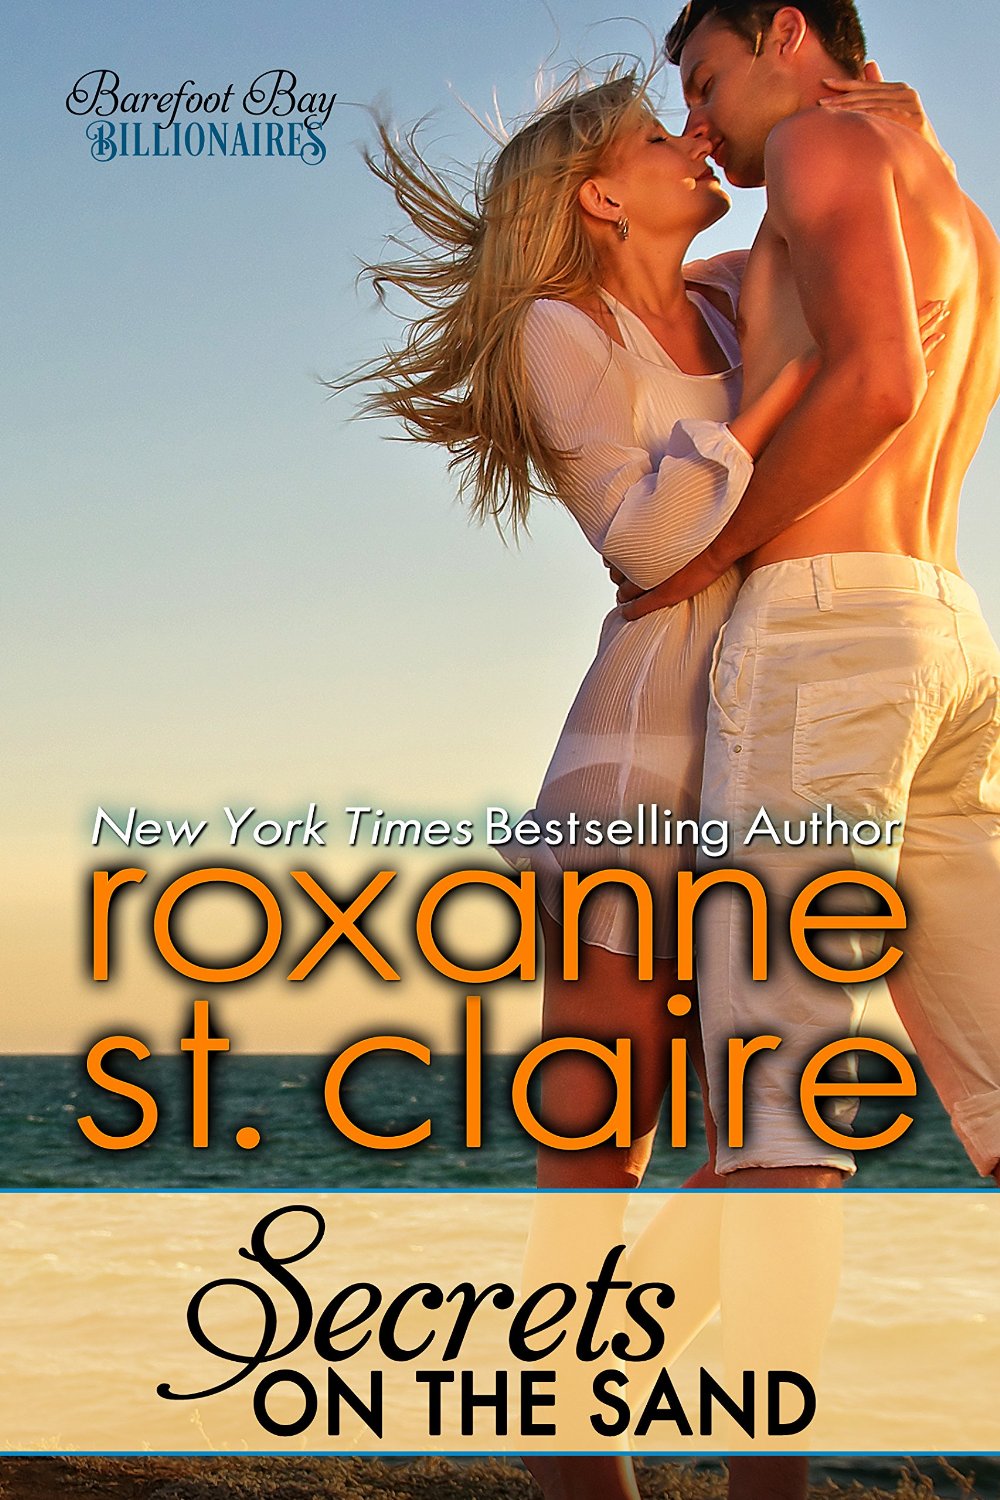 FREE: Secrets on the Sand by Roxanne St. Claire